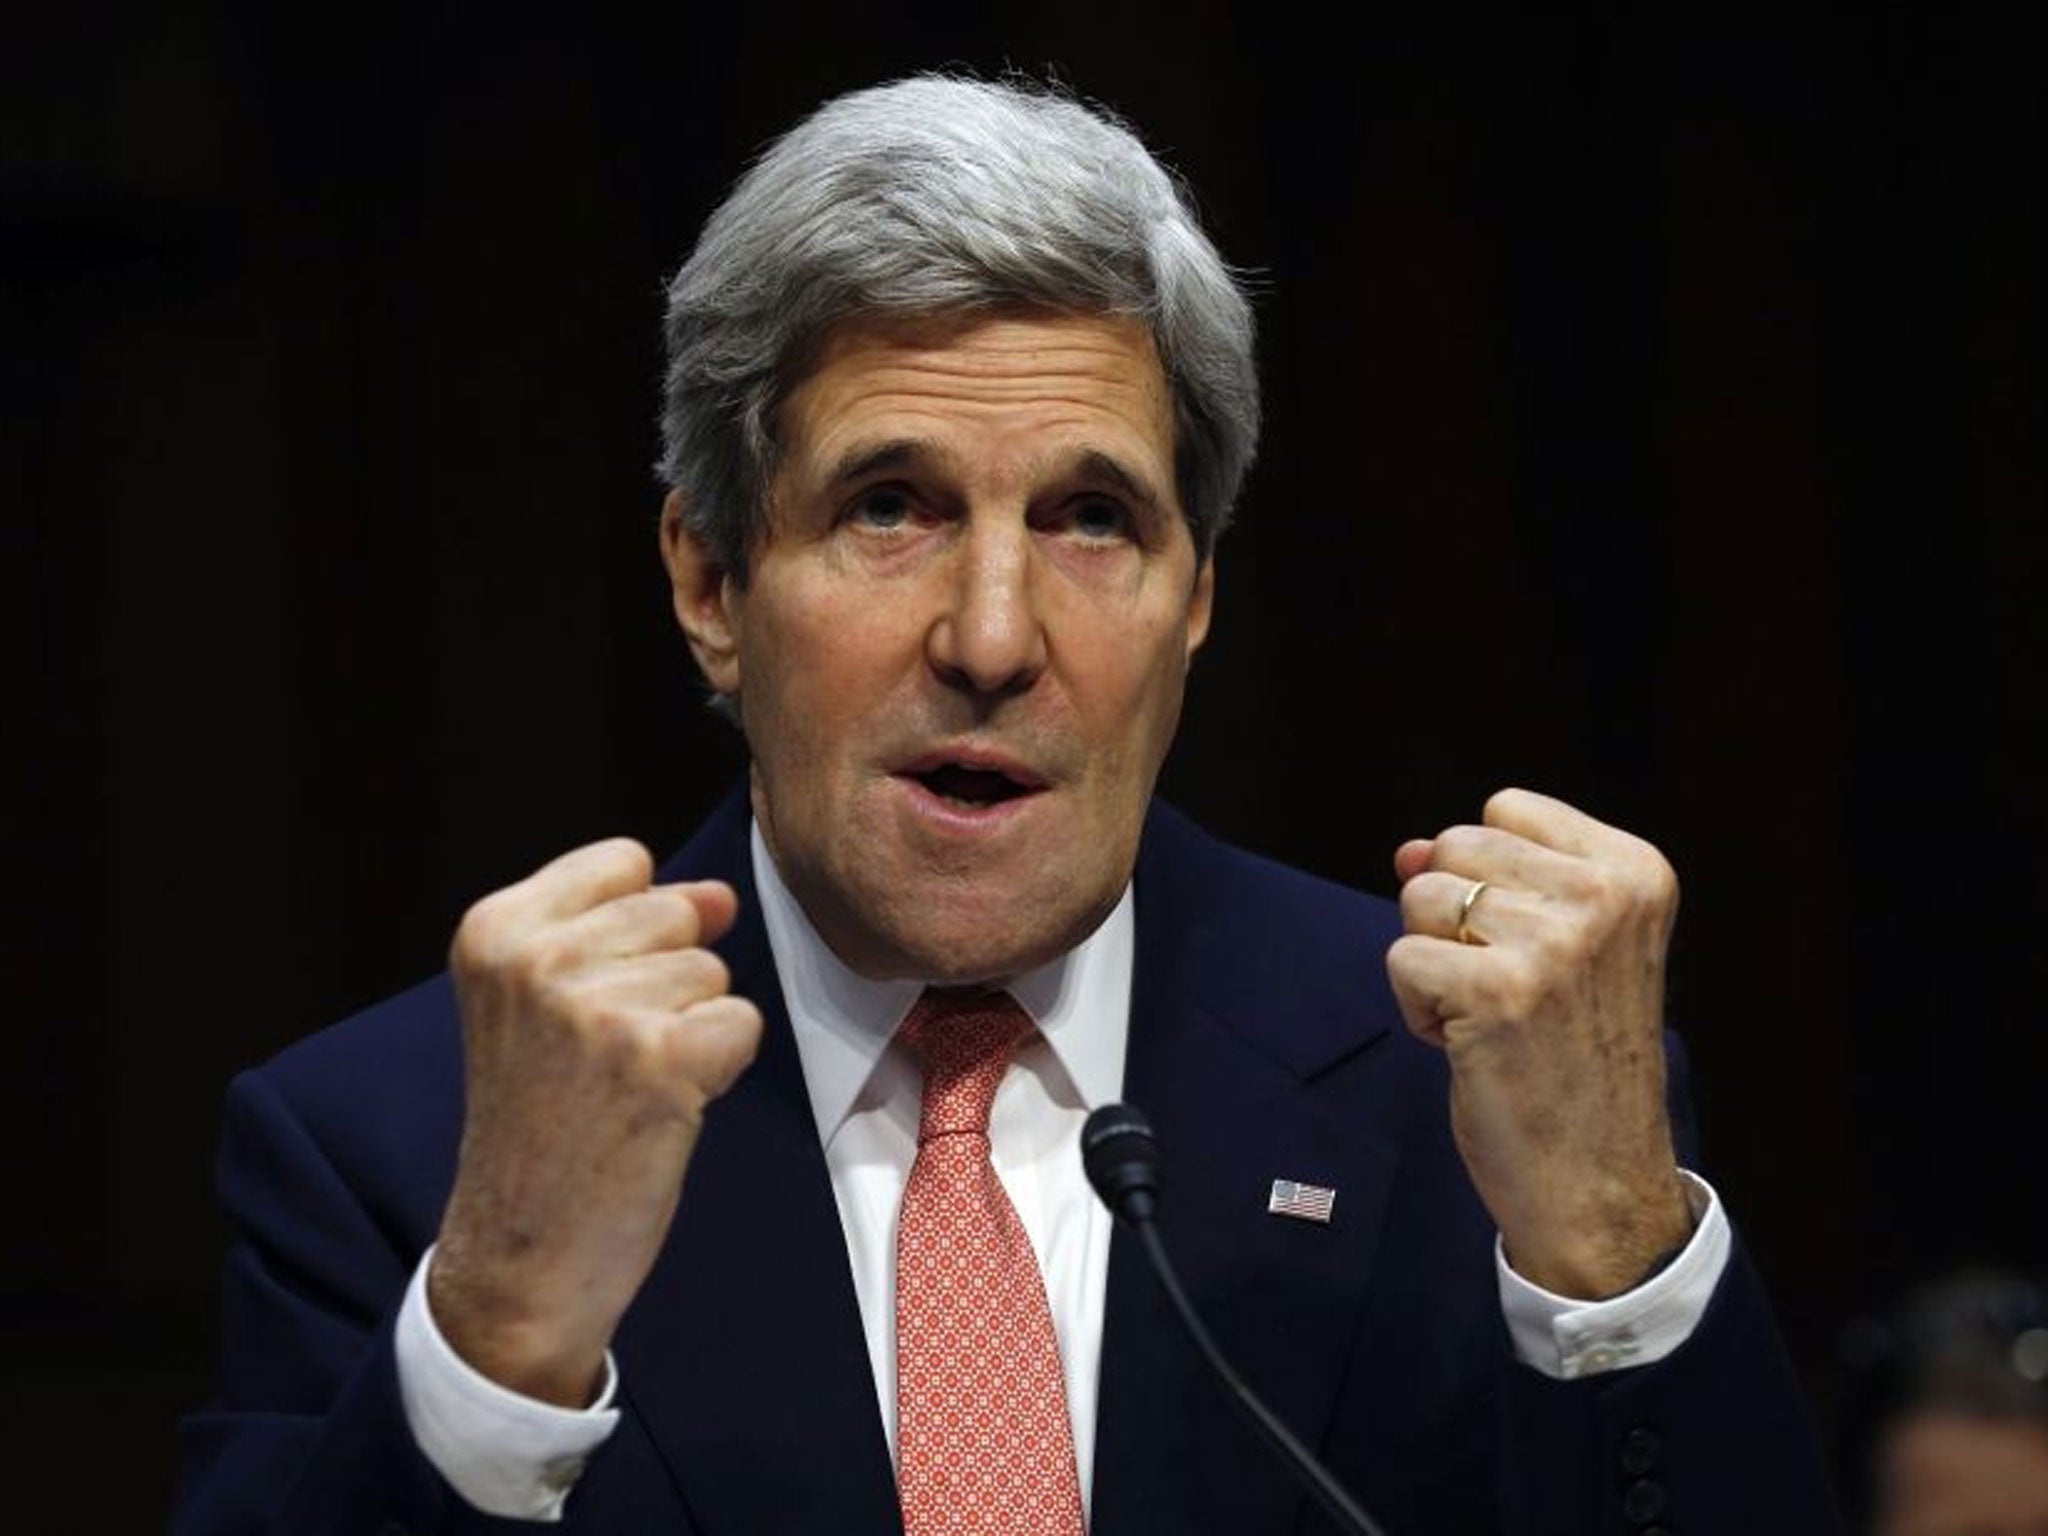 U.S. Secretary of State John Kerry makes fists while speaking about the crisis in Ukraine during a hearing held by the Subcommittee on State, Foreign Operations, and Related Programs to examine proposed budget estimates for fiscal year 2015 for the Depart